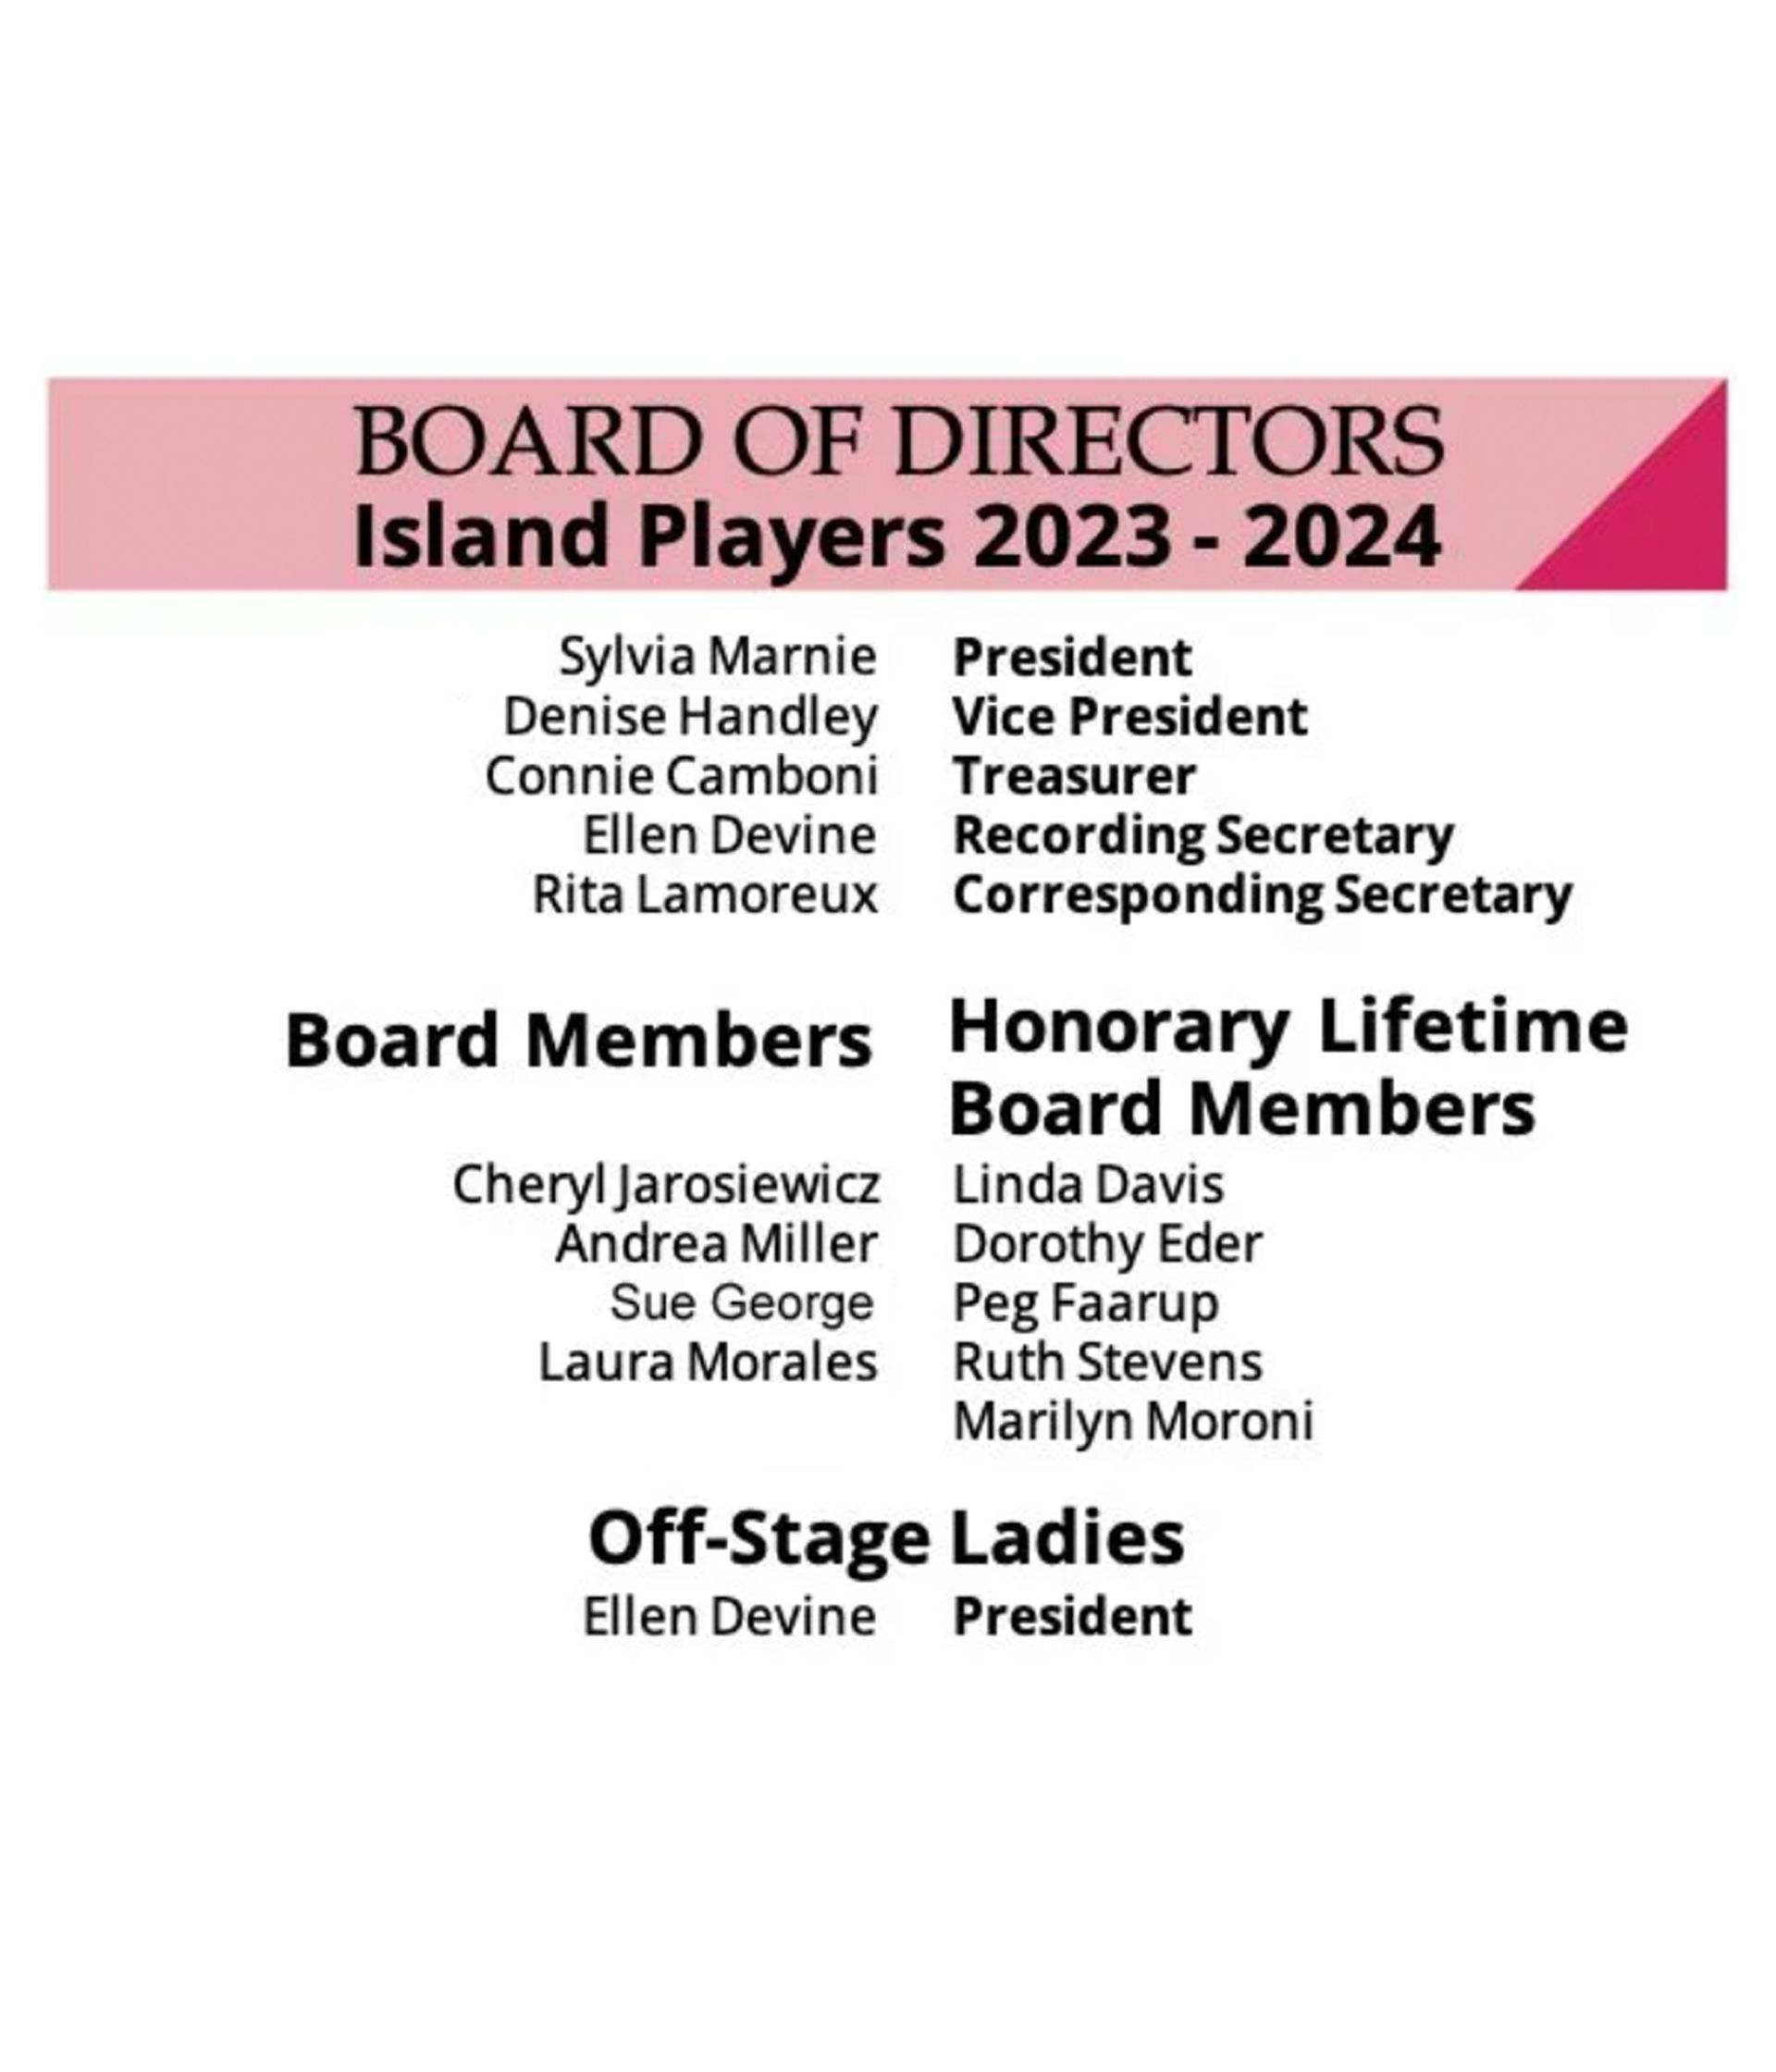 The Island Players Board of Directors.